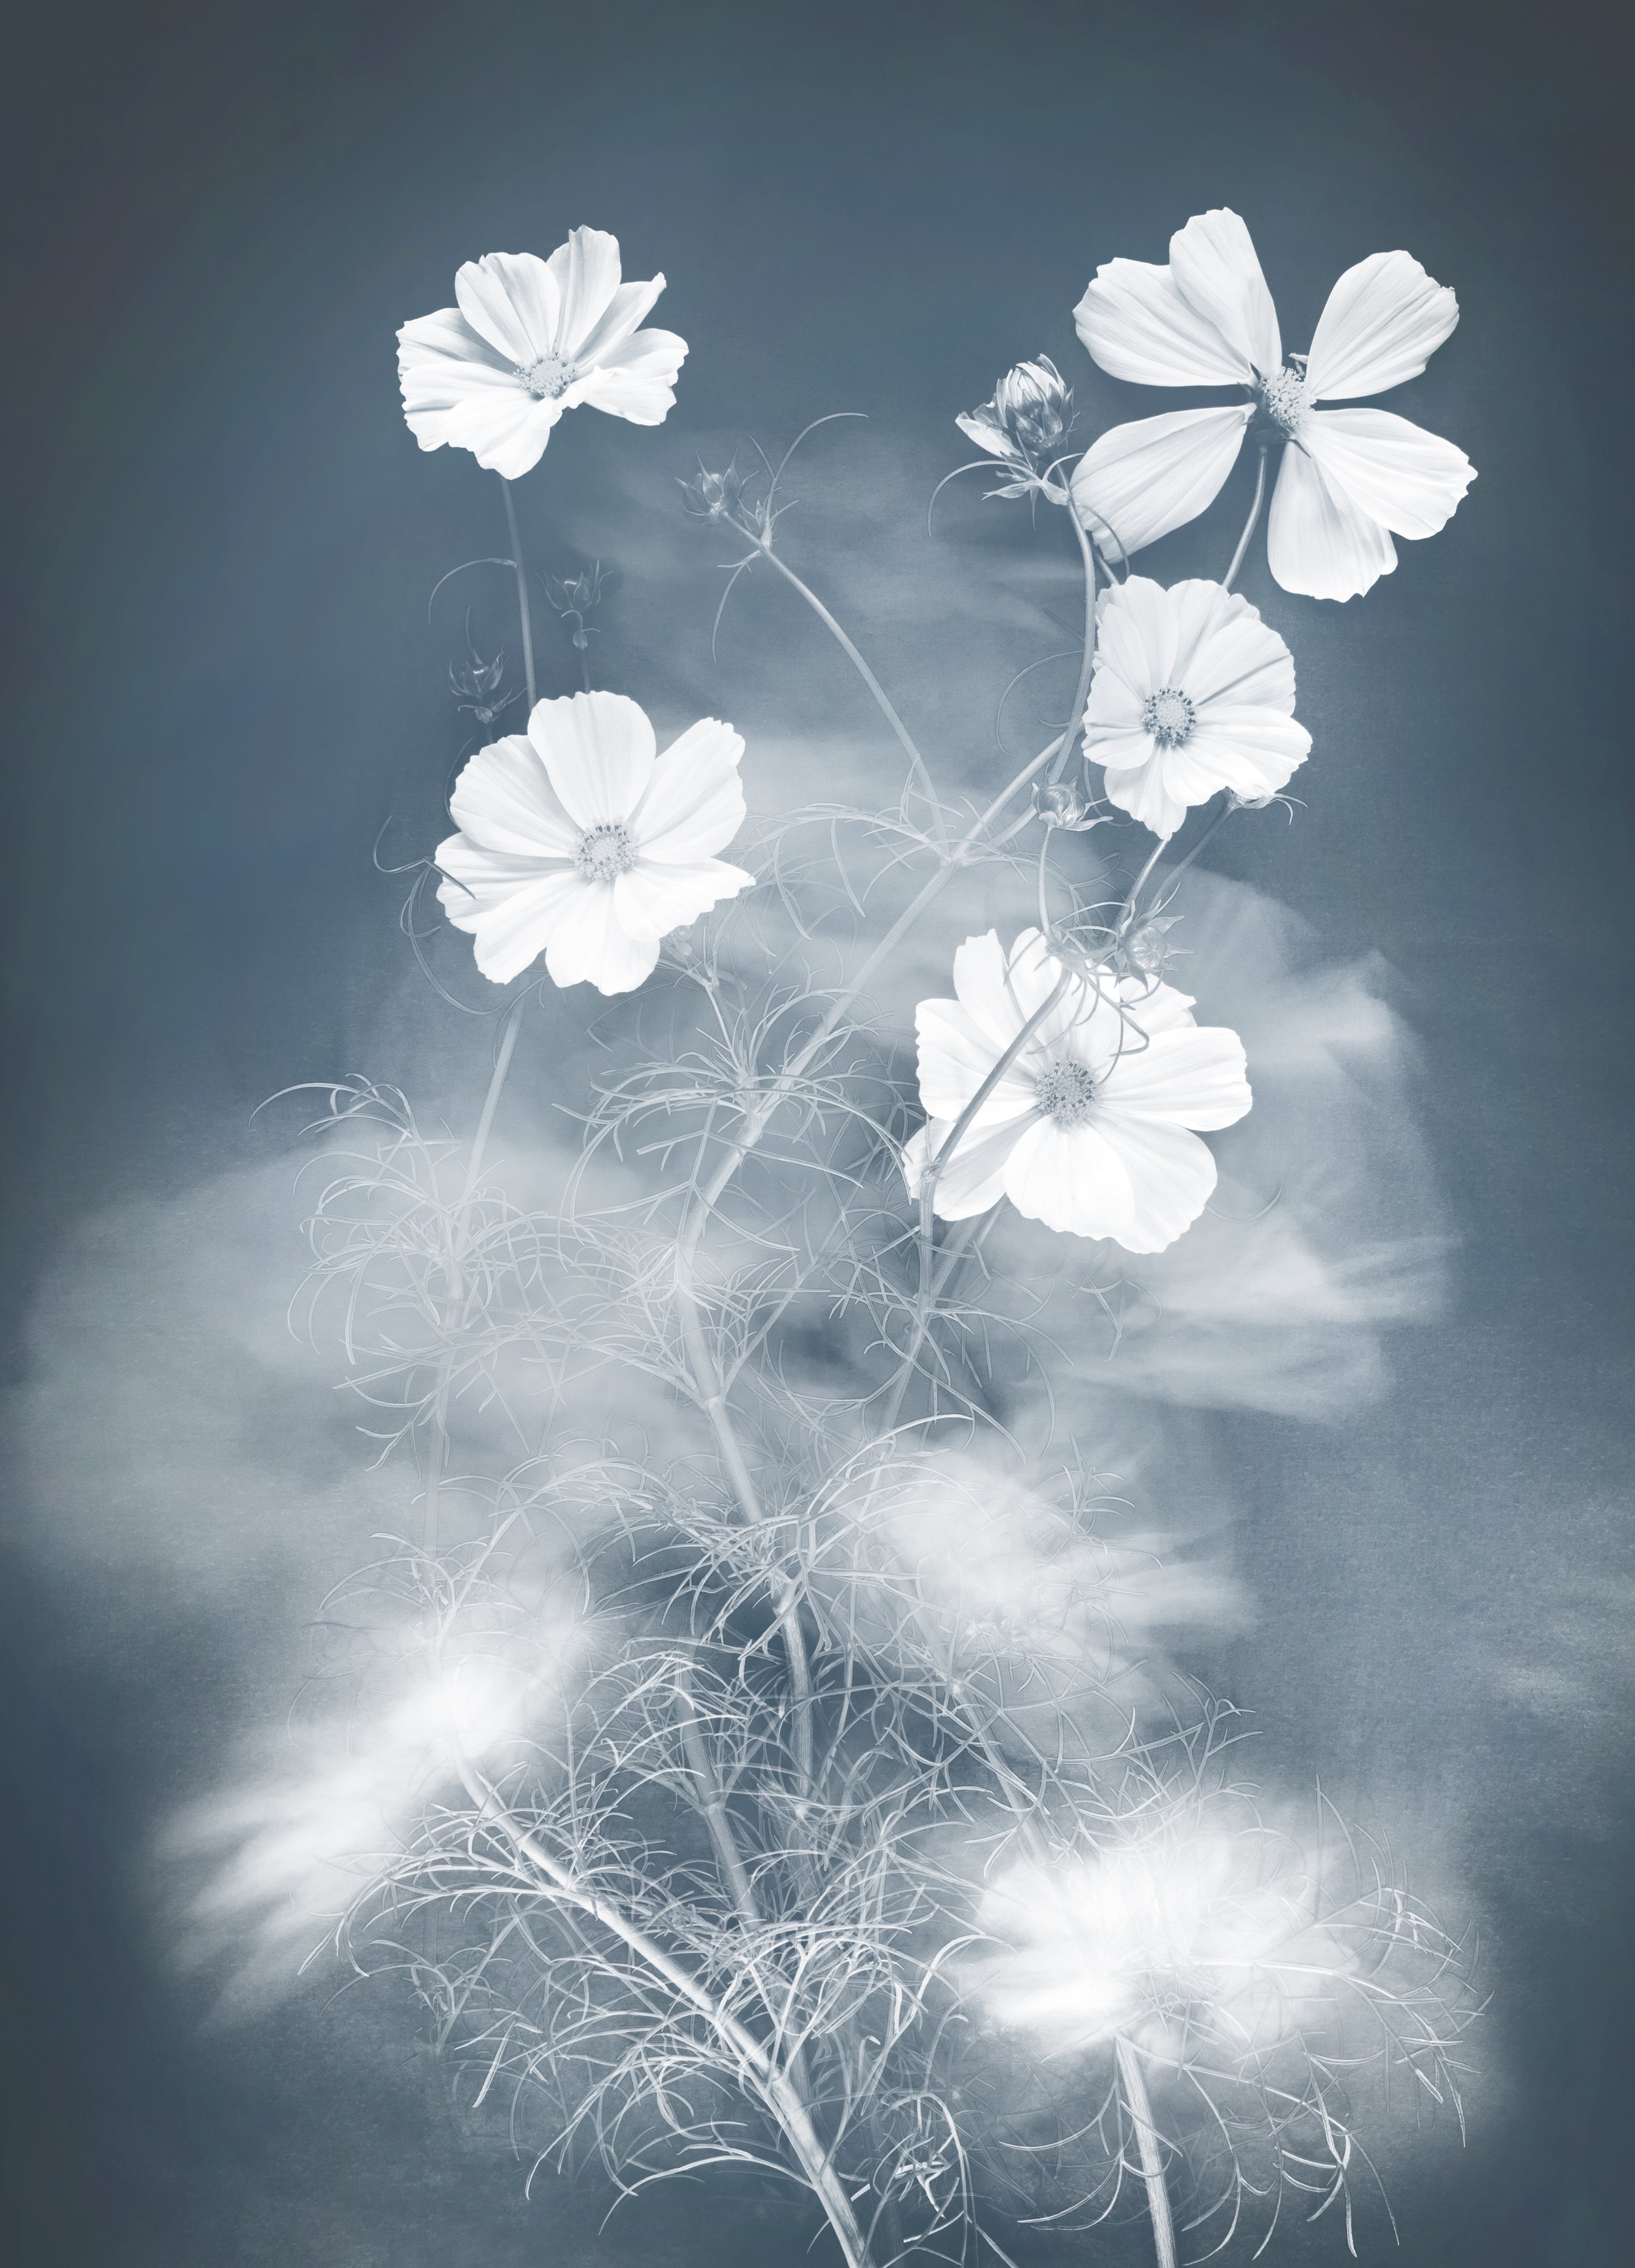 Joyce Tenneson, Cosmos, 2/10, 2021, Archival pigment prints, 22 x 17 inches, $1,900.